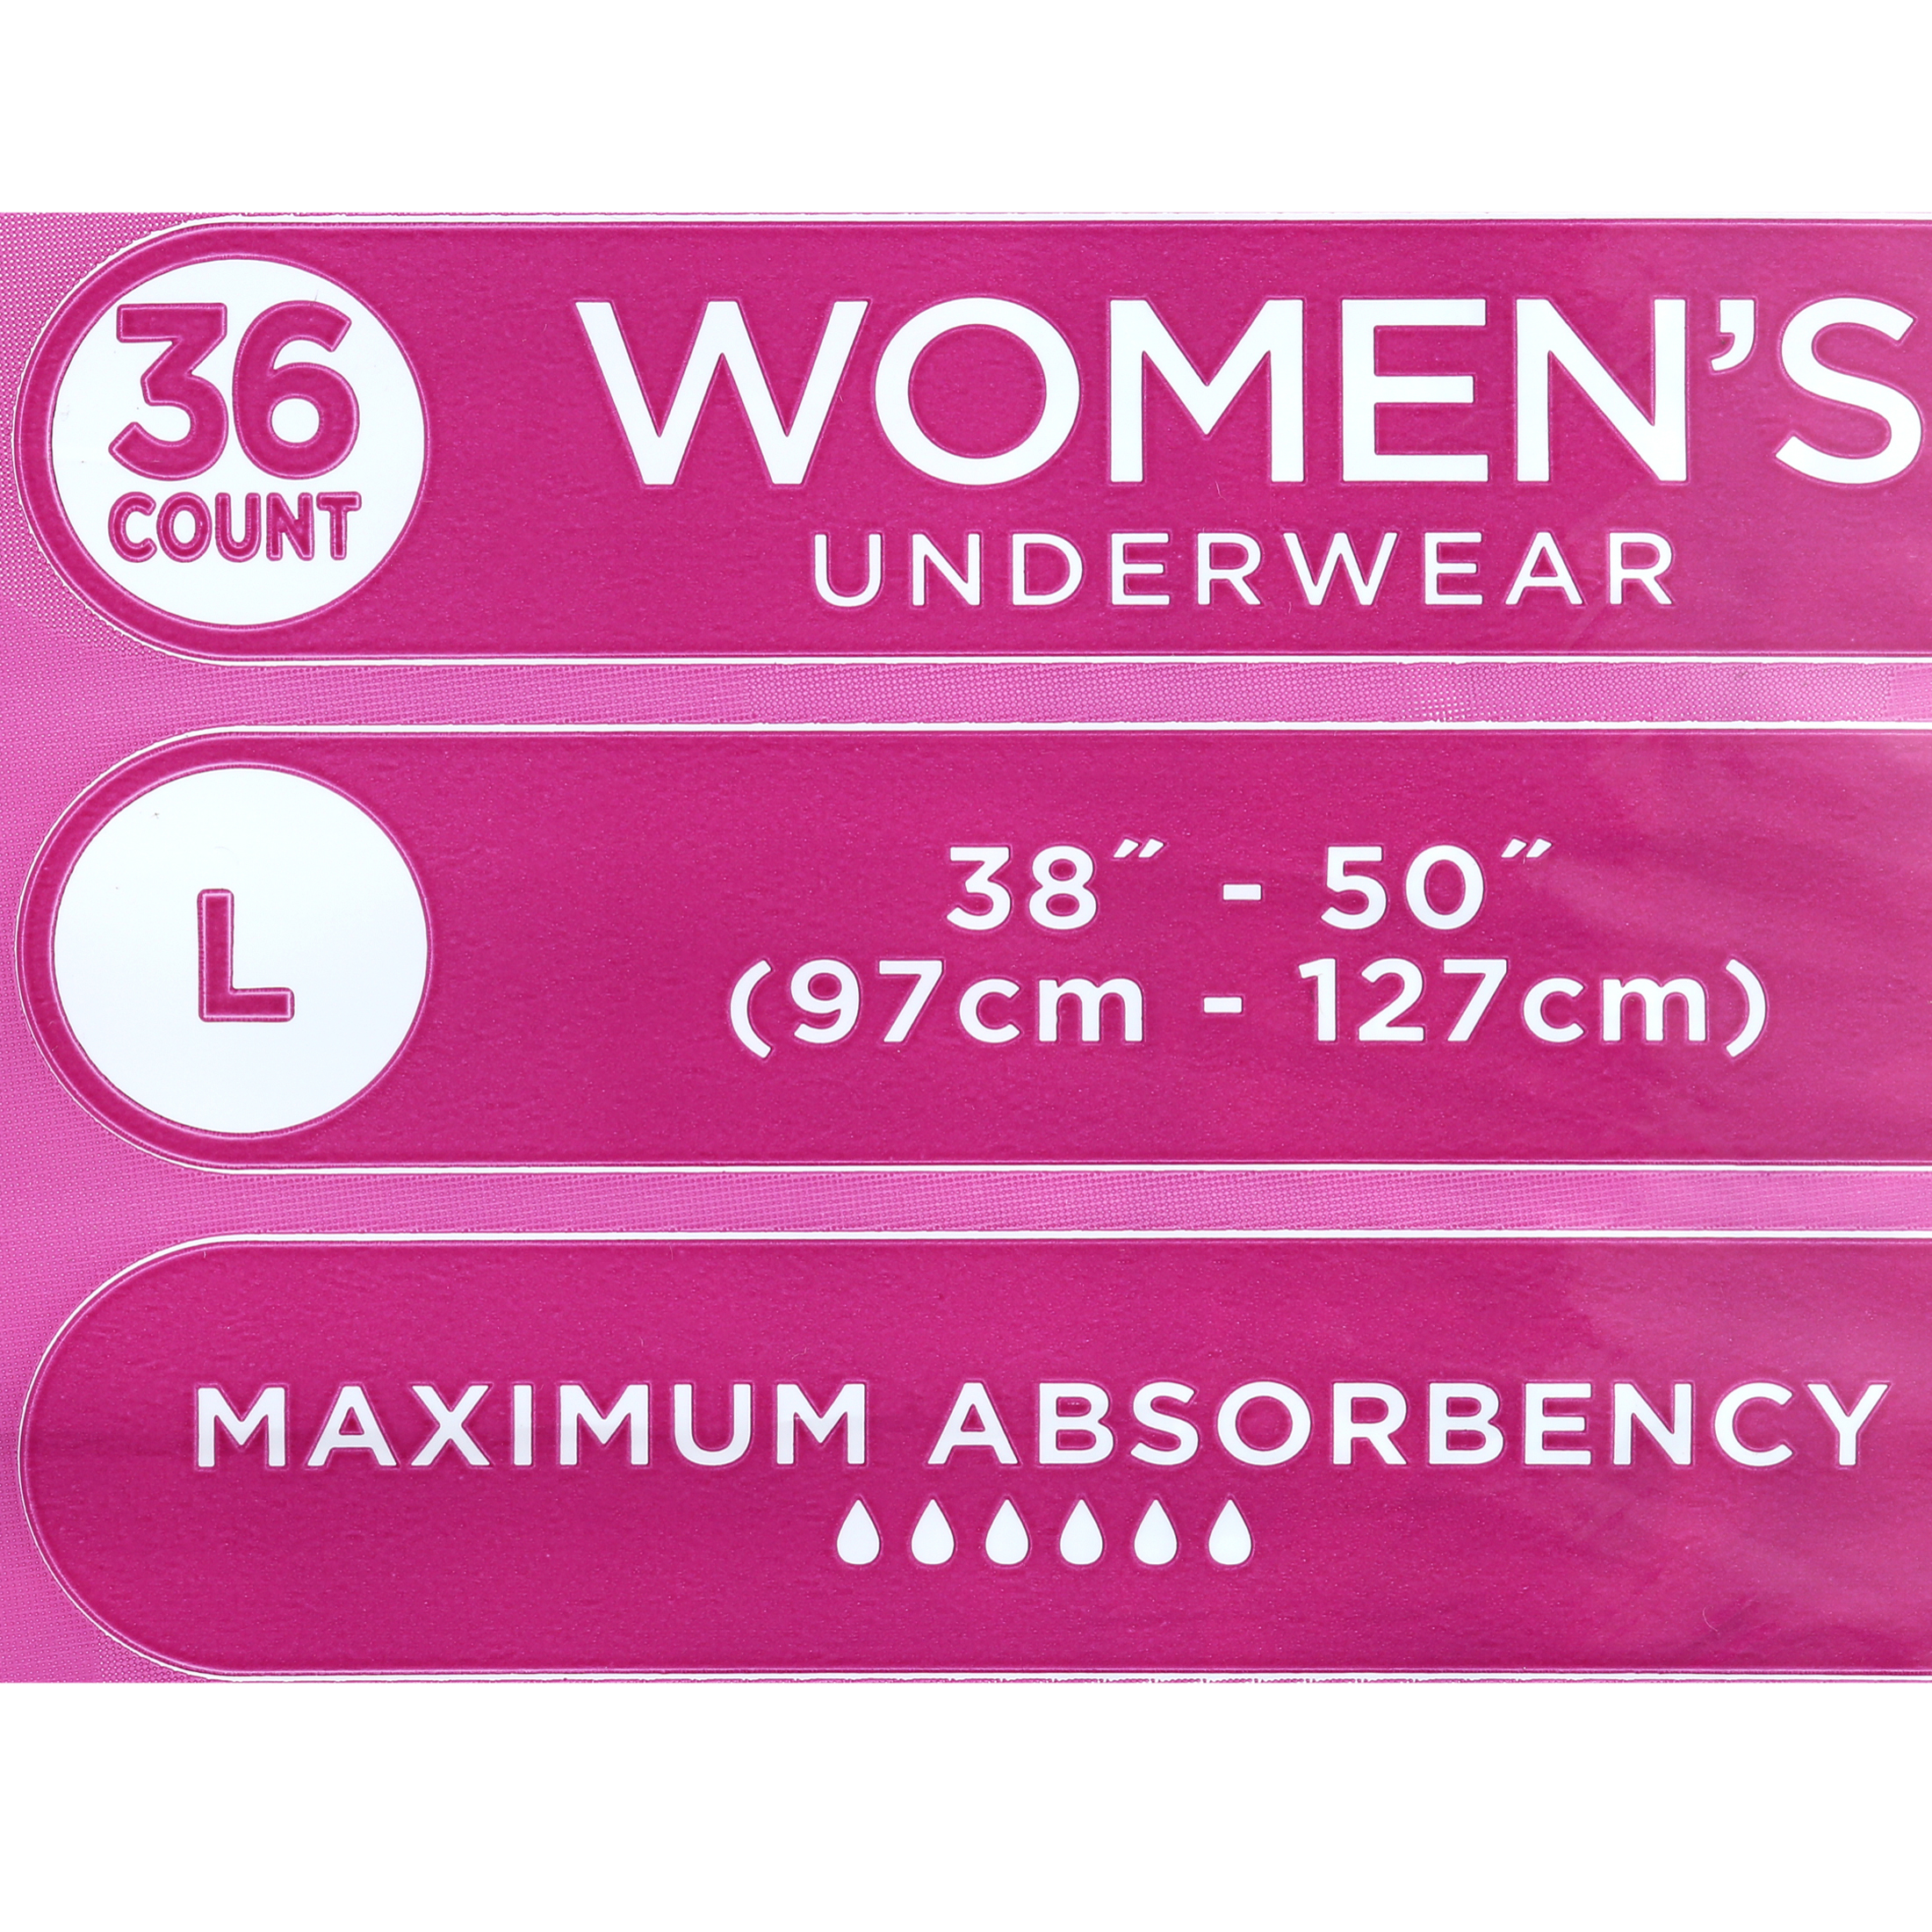 Assurance Women's Incontinence & Postpartum Underwear, Maximum Absorbency, L (36 Count) - image 4 of 8